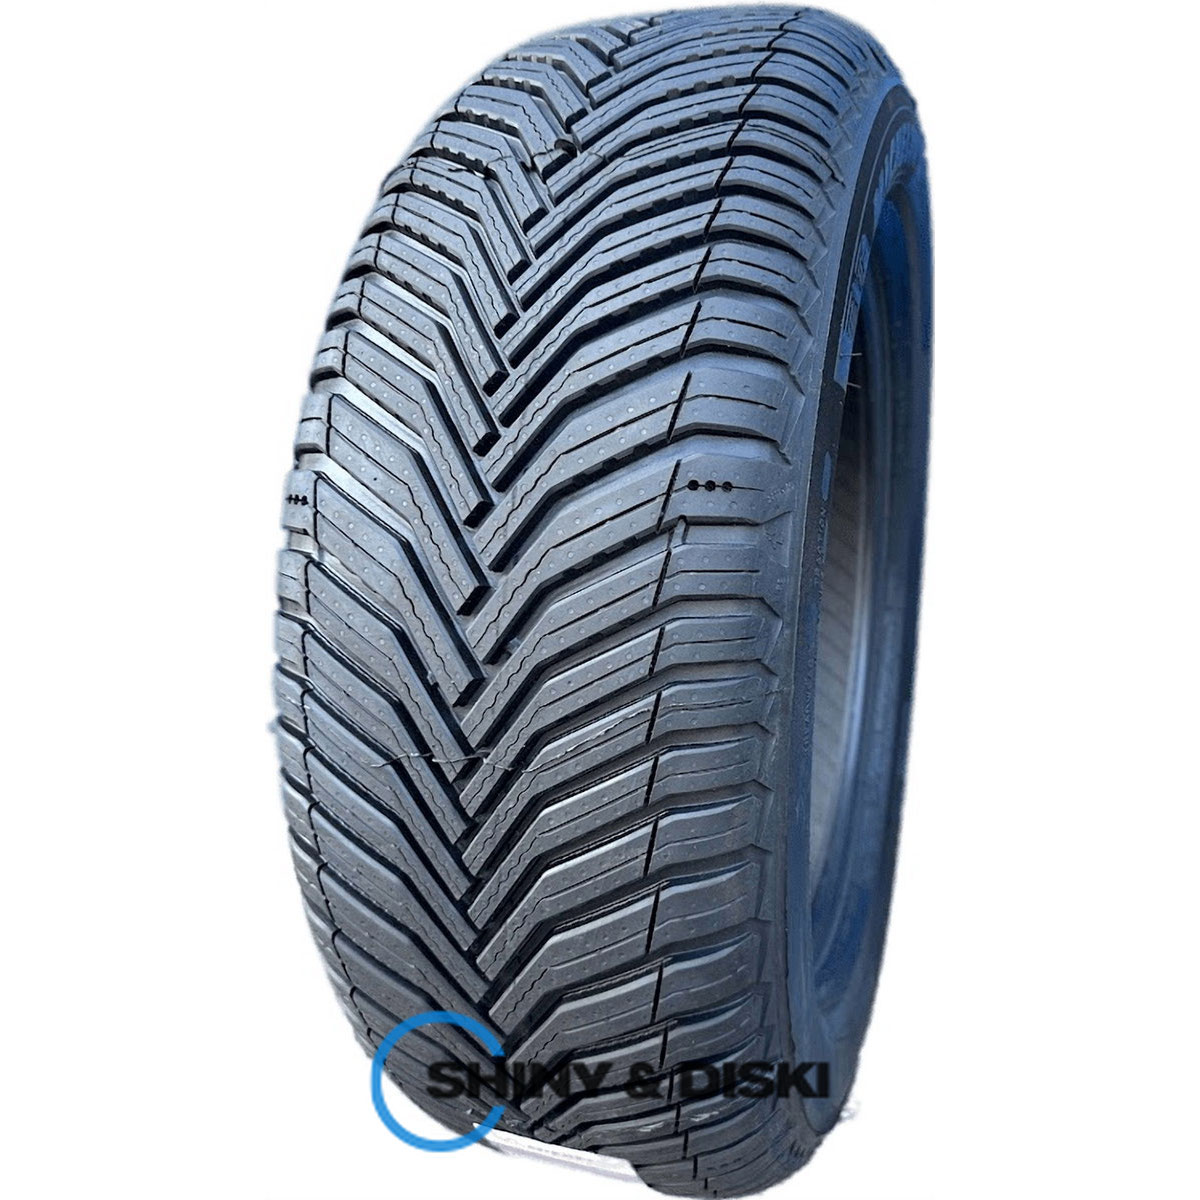 покрышки michelin cross climate 2 suv 265/60 r18 110h